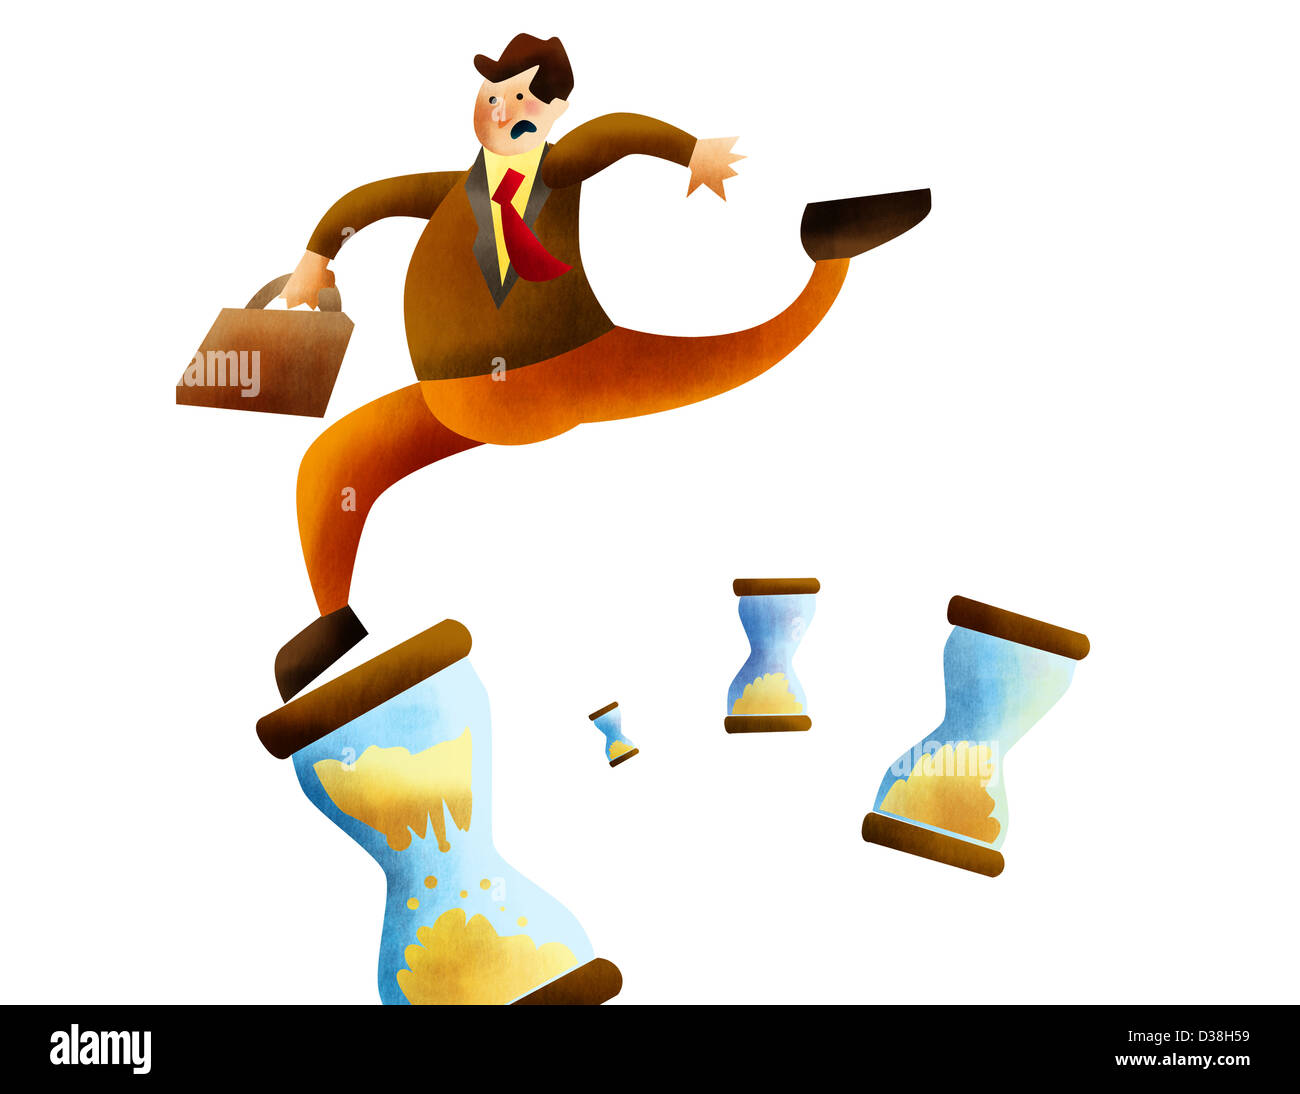 Businessman holding briefcase and running over hourglasses Stock Photo